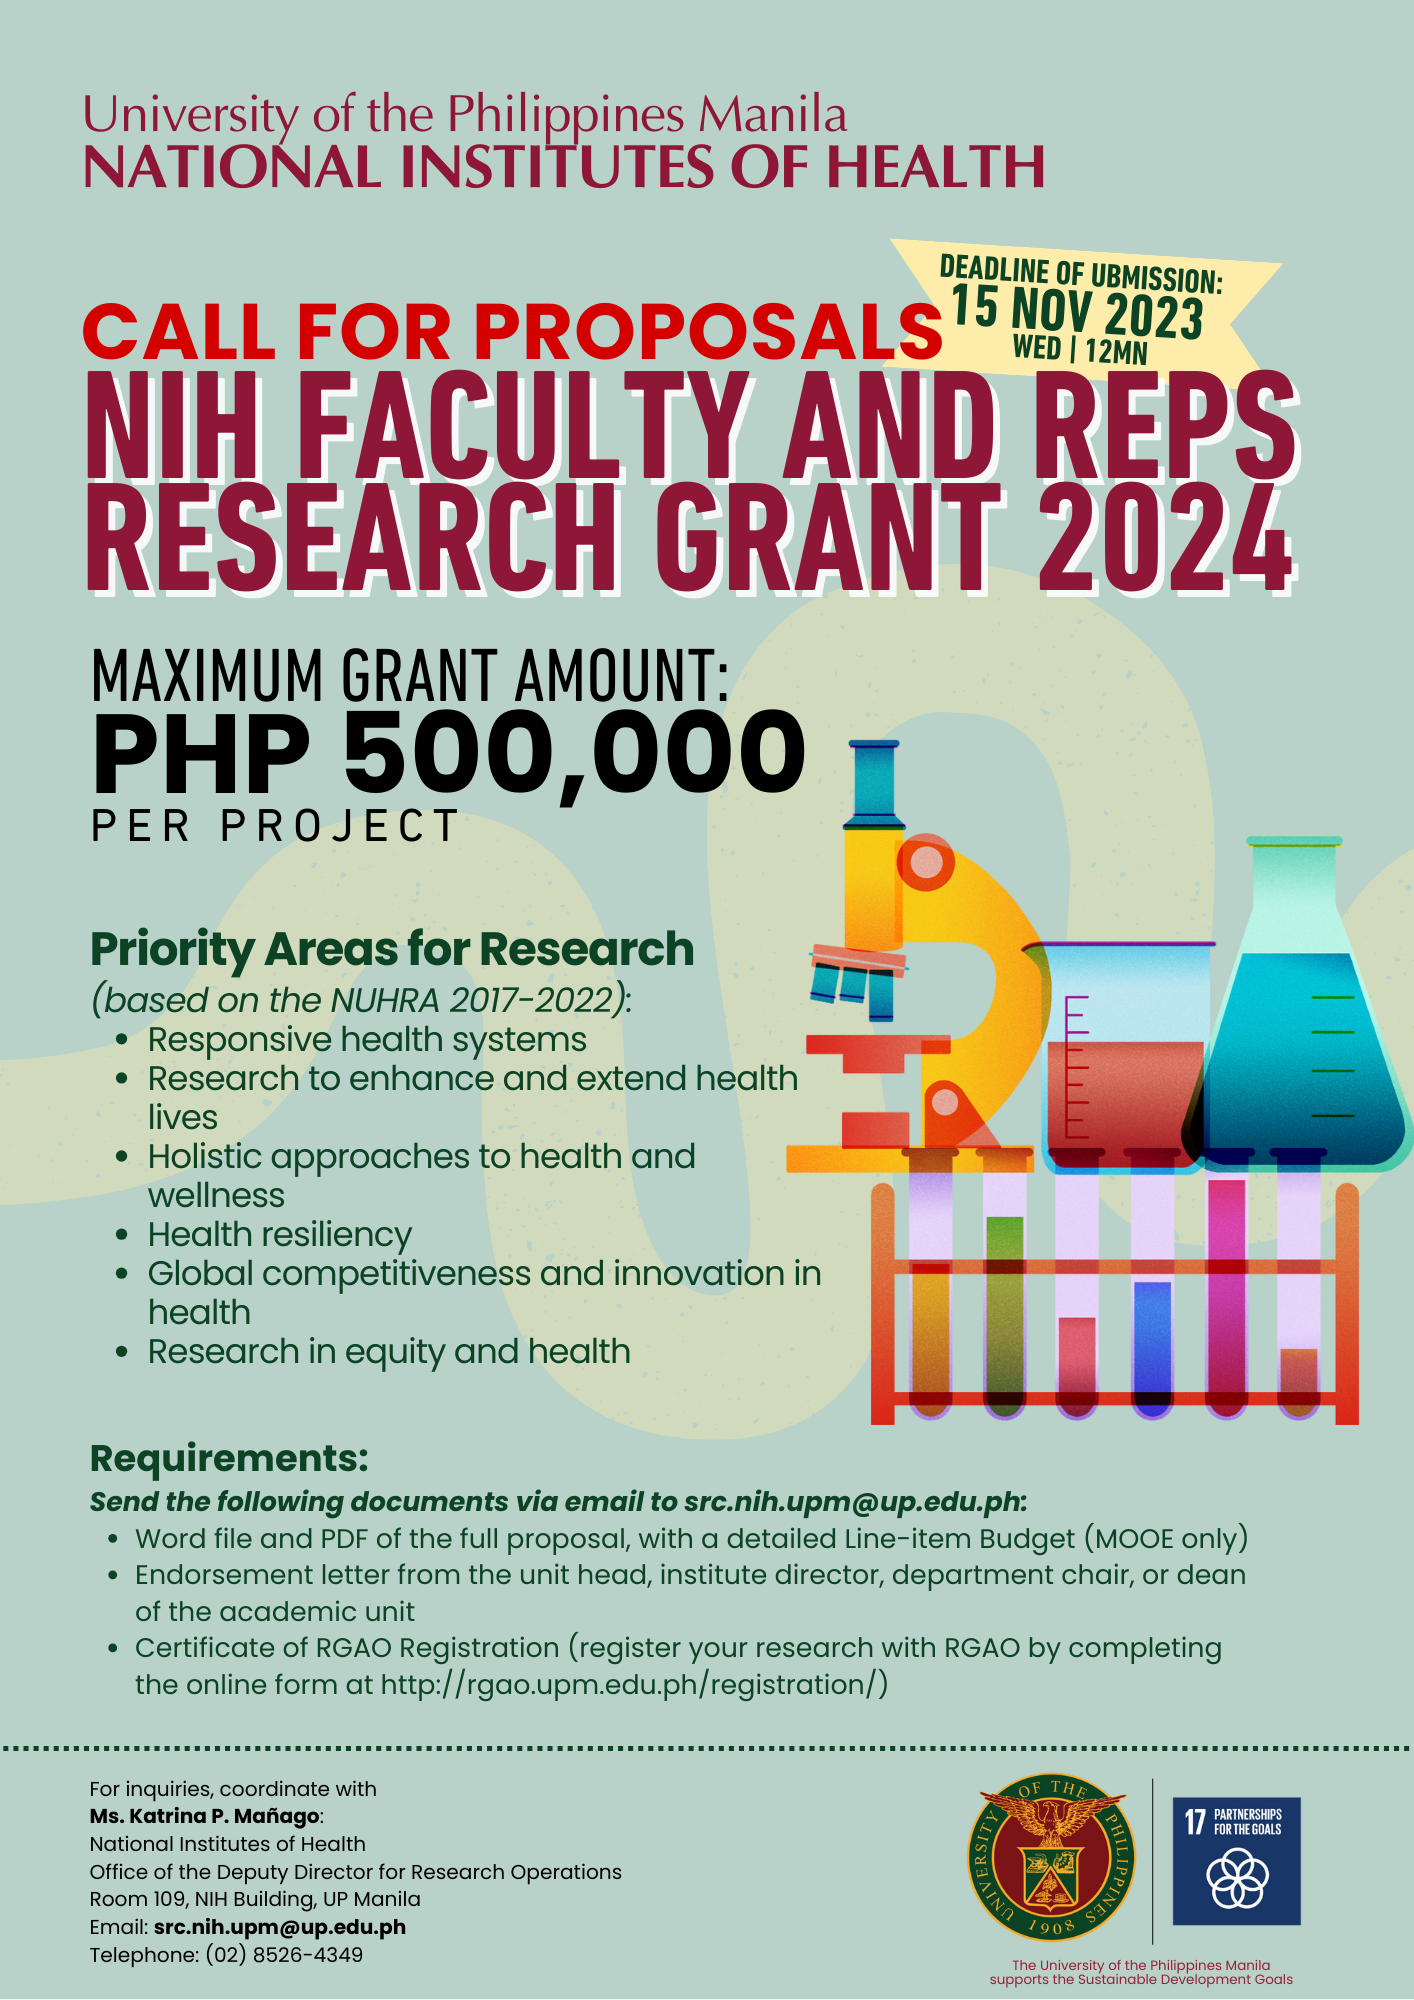 Call for Full Proposals for Funding by the NIH Faculty and REPS